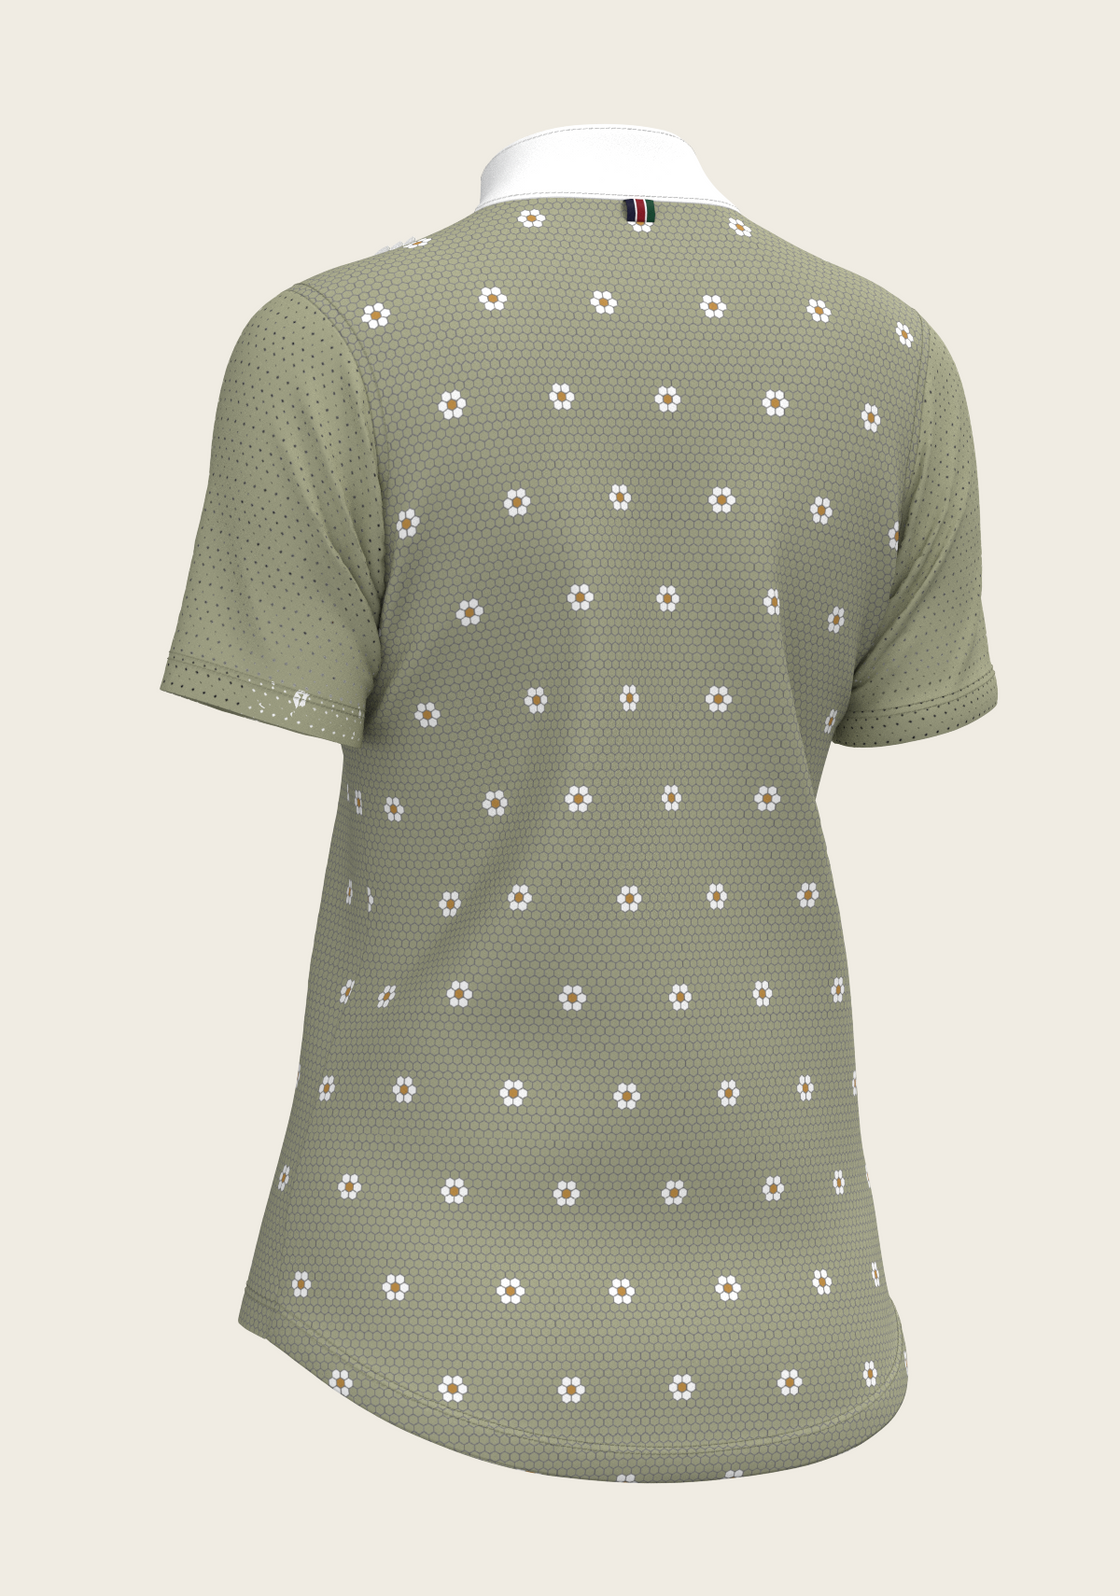 Mosaic Daises in Olive Short Pleated Short Sleeve Show Shirt